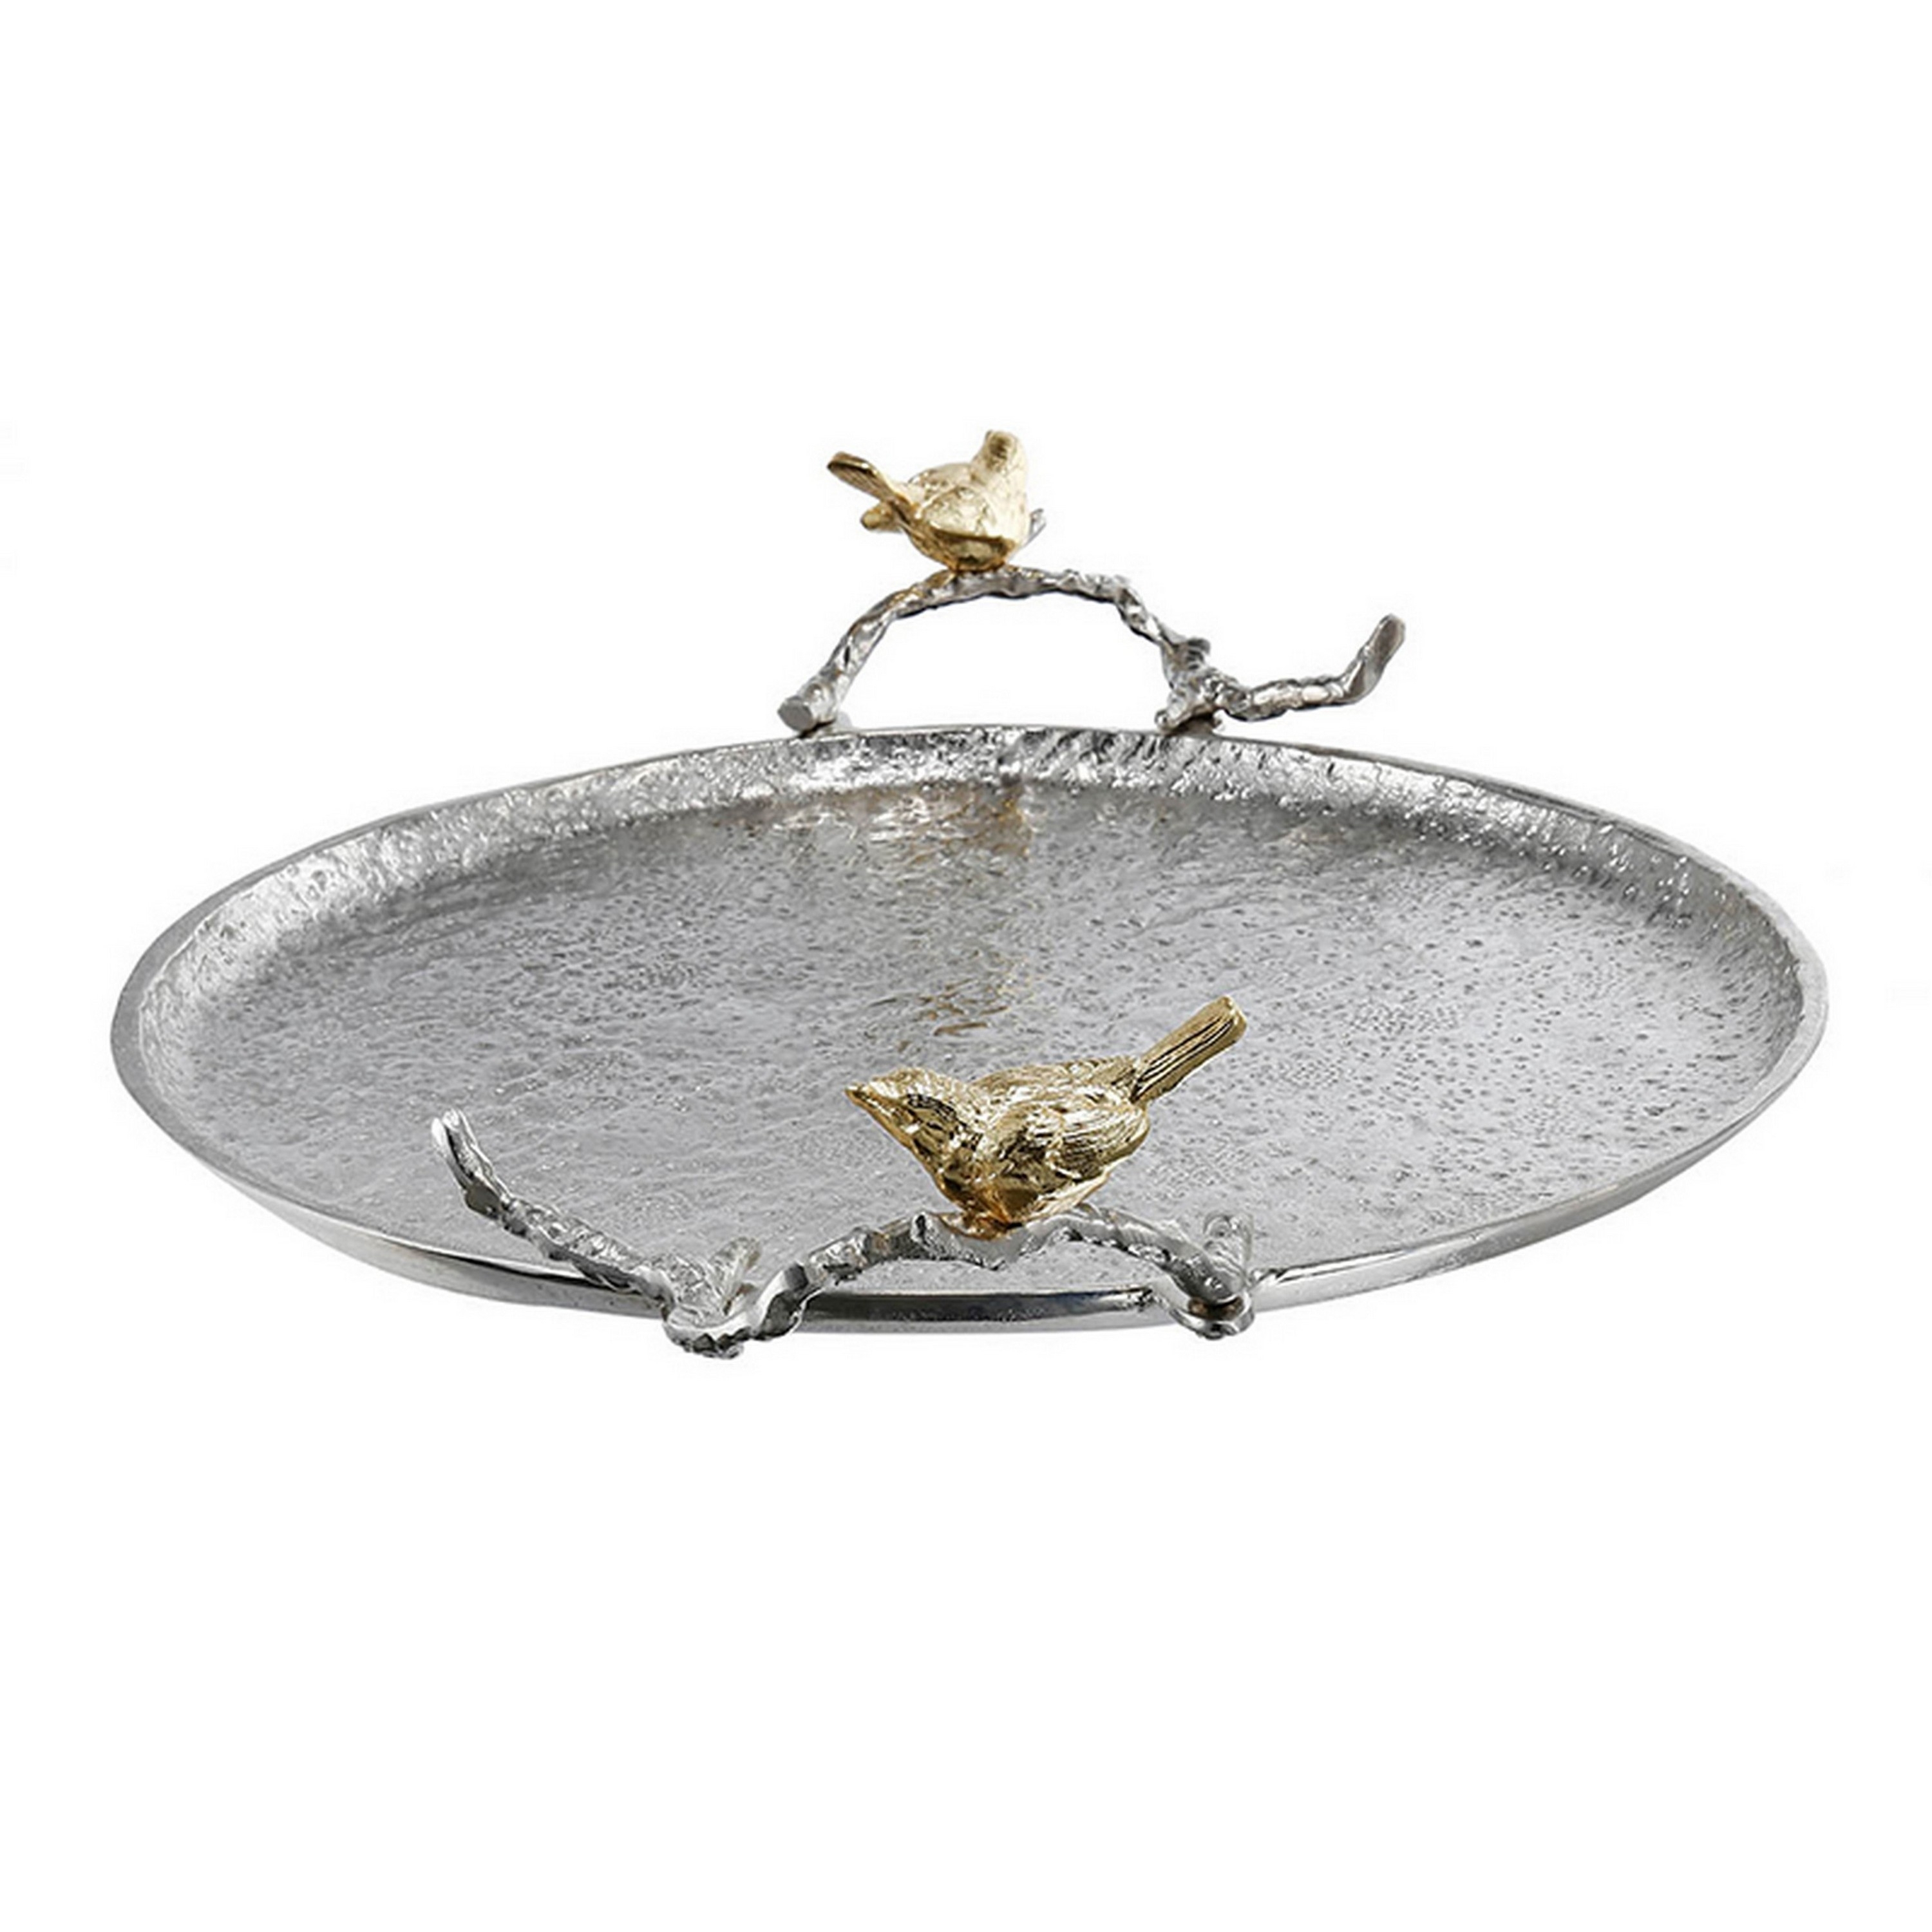 Lark 21 Inch Decorative Tray, Silver Finished Metal With Twisted Handles- Saltoro Sherpi